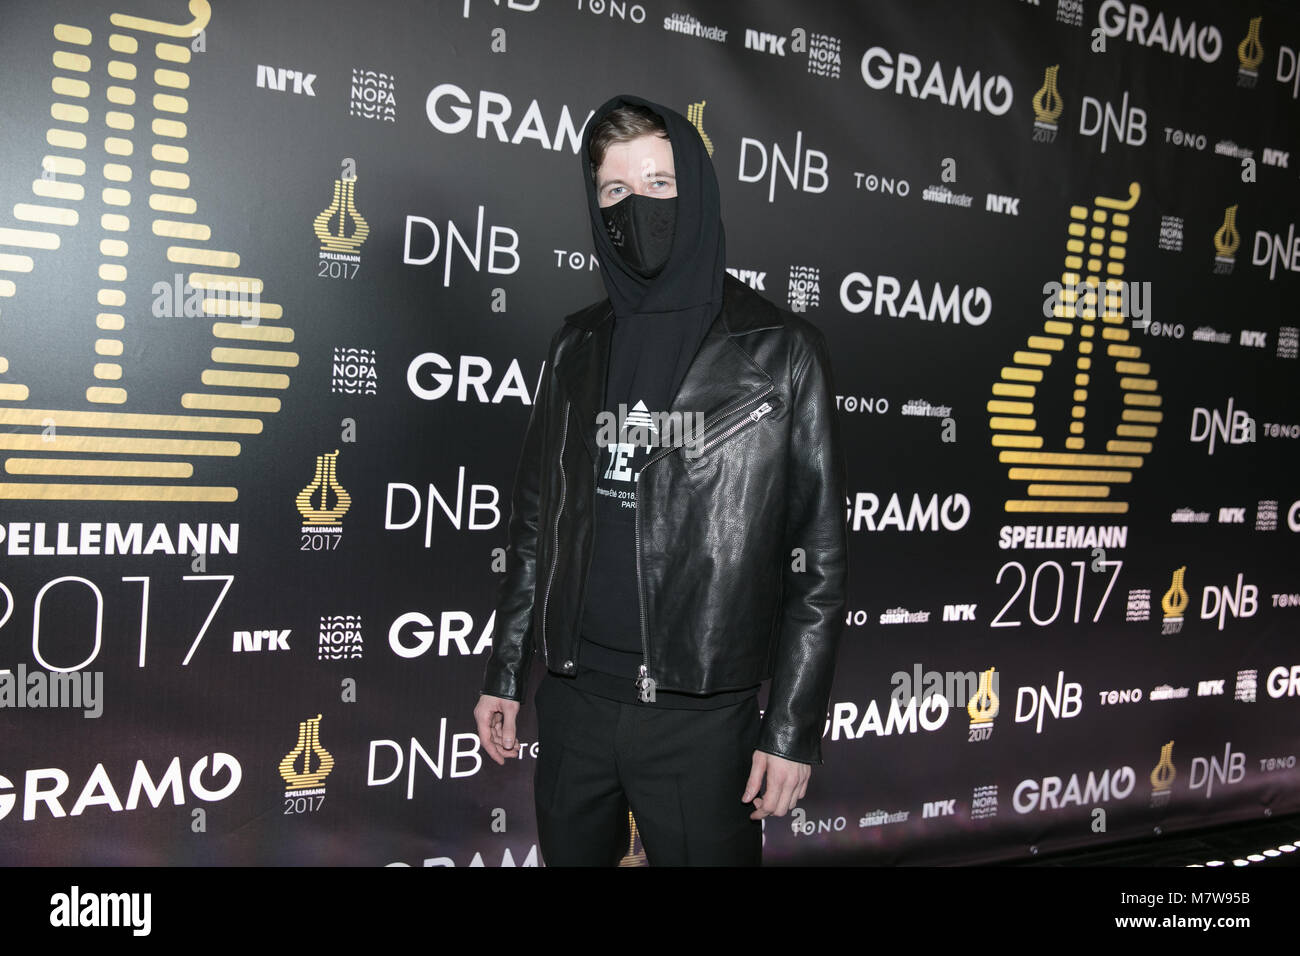 Norway, Oslo - February 25, 2018. The Norwegian record producer Alan Walker seen at the red carpet at the Norwegian Grammy Awards, Spellemannprisen 2017, in Oslo. (Photo credit: Gonzales Photo - Stian S. Moller). Stock Photo